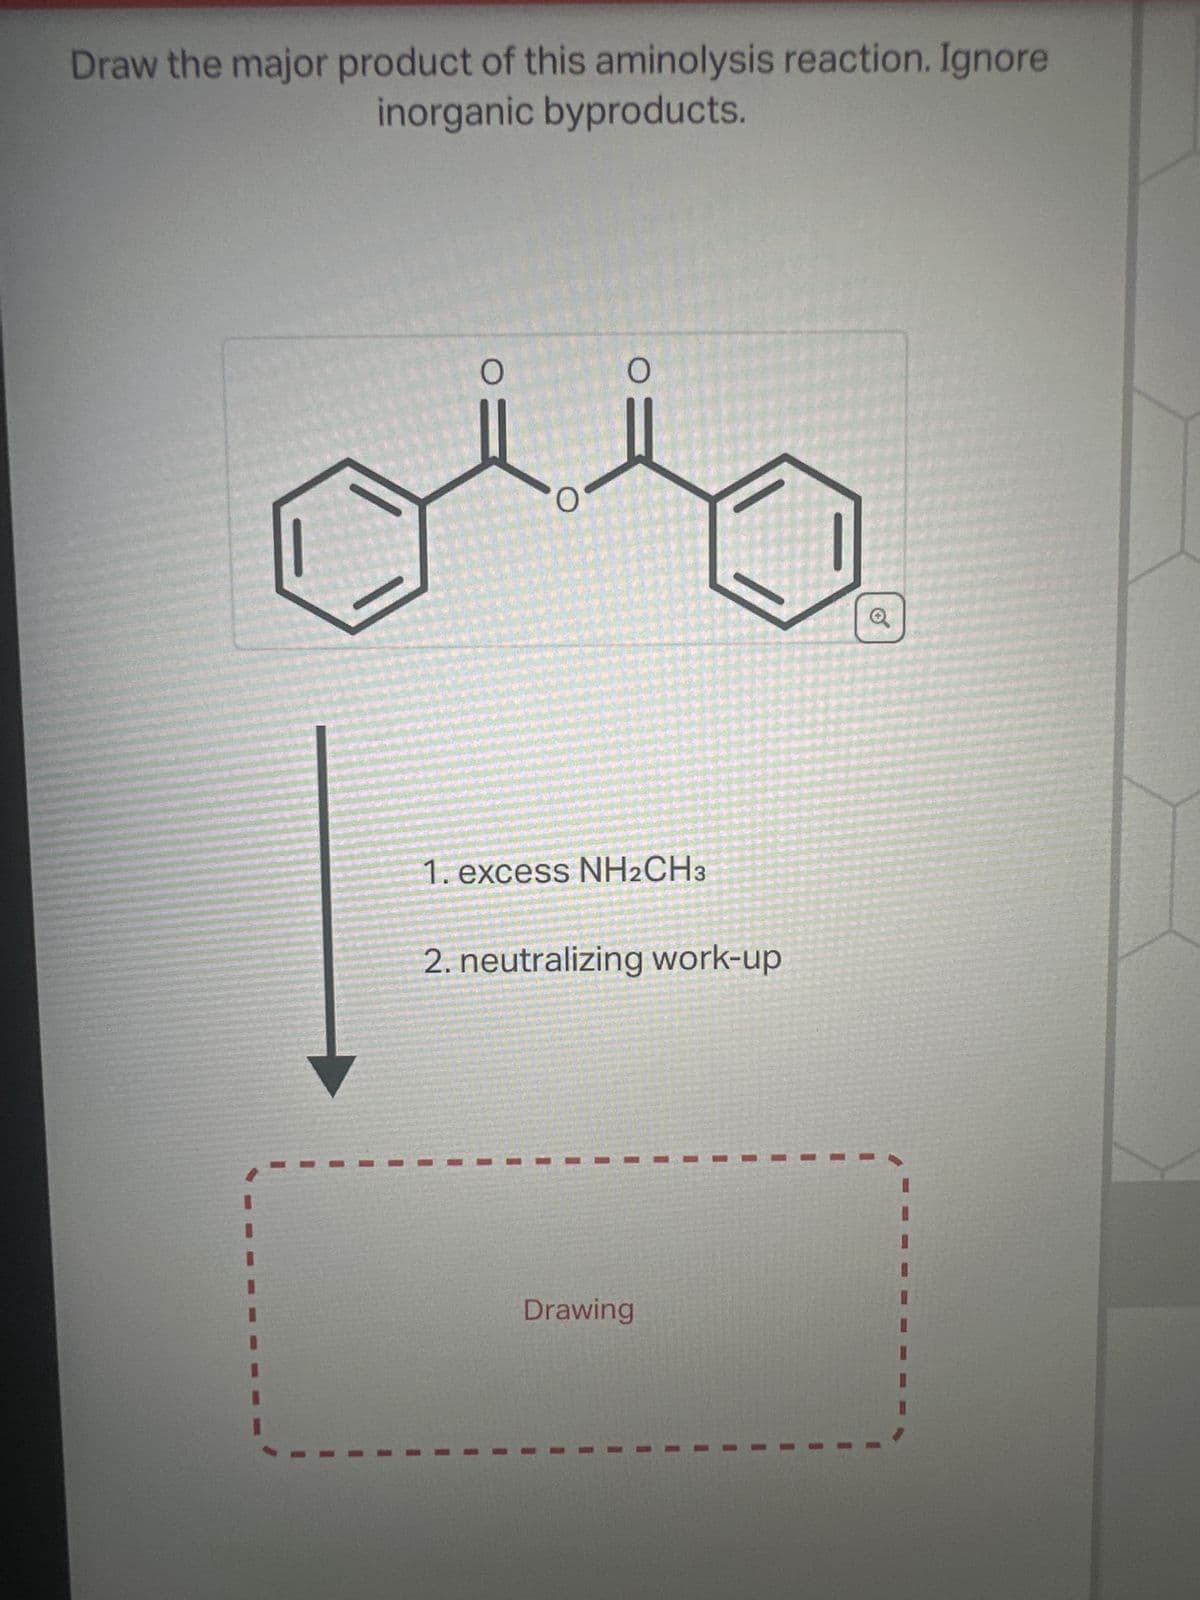 Draw the major product of this aminolysis reaction. Ignore
inorganic byproducts.
NO
1. excess NH2CH3
2. neutralizing work-up
Drawing